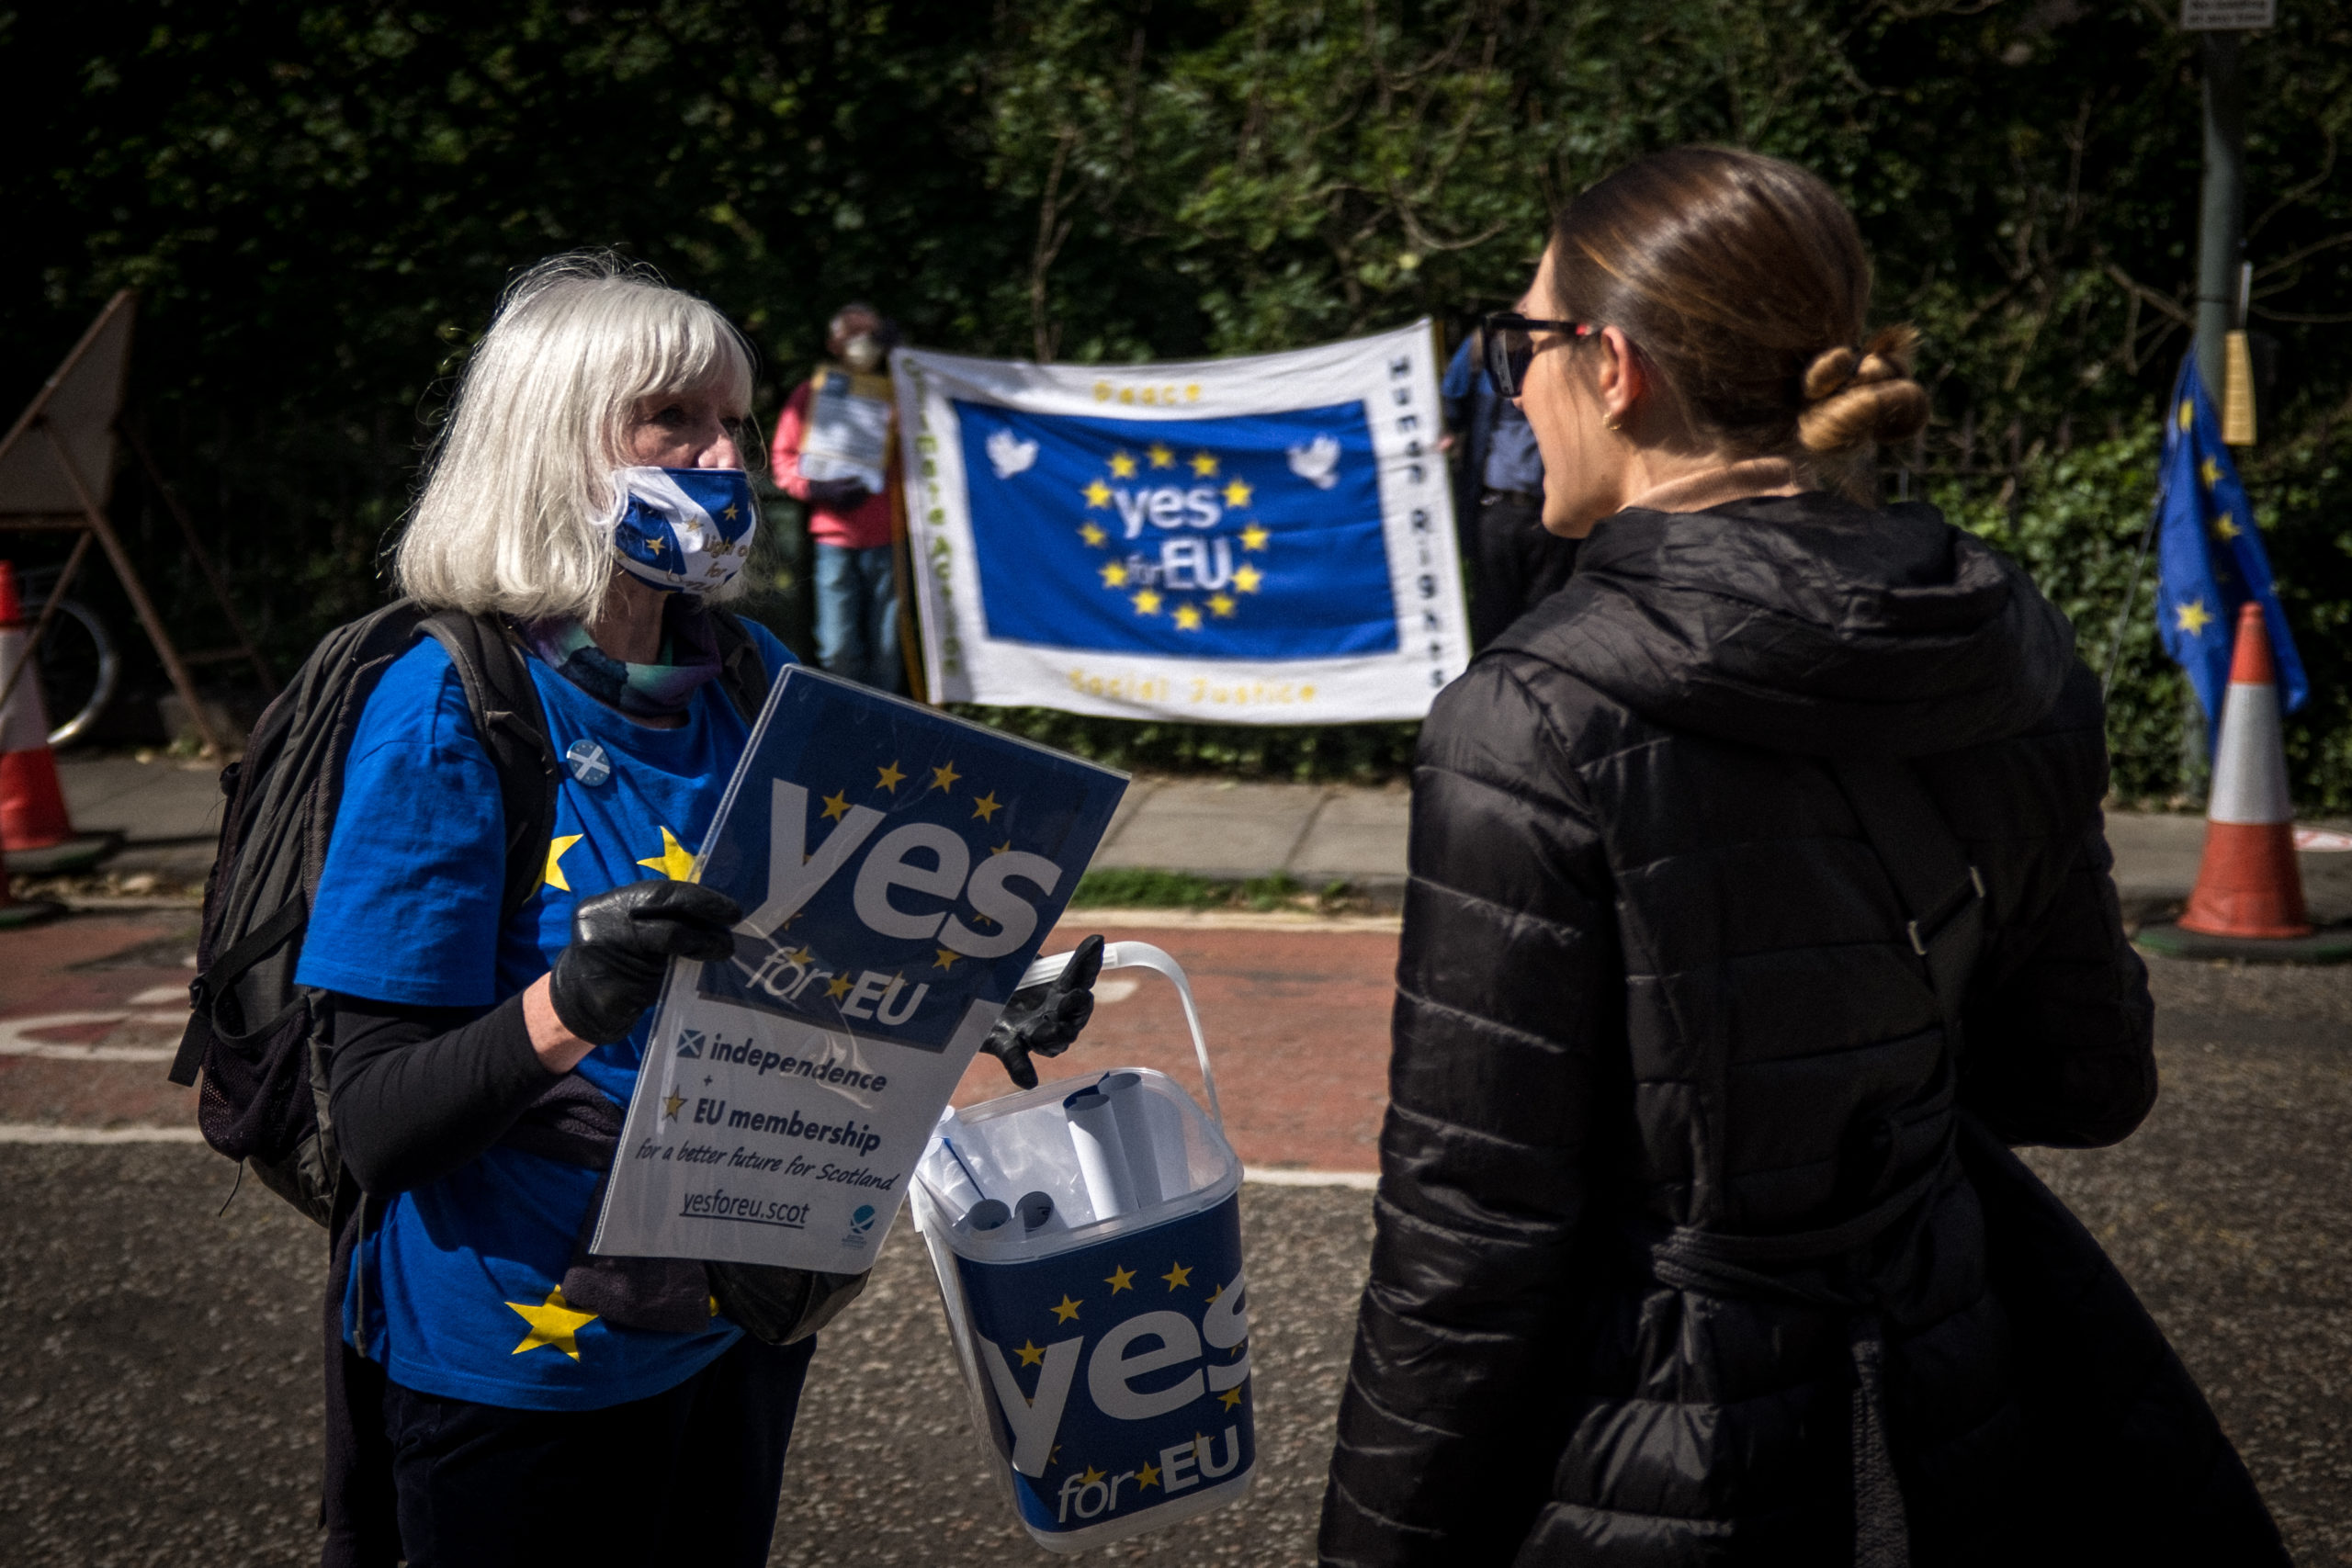 An activist with YES for EU discusses independence and rejoining the EU with a pedestrian.